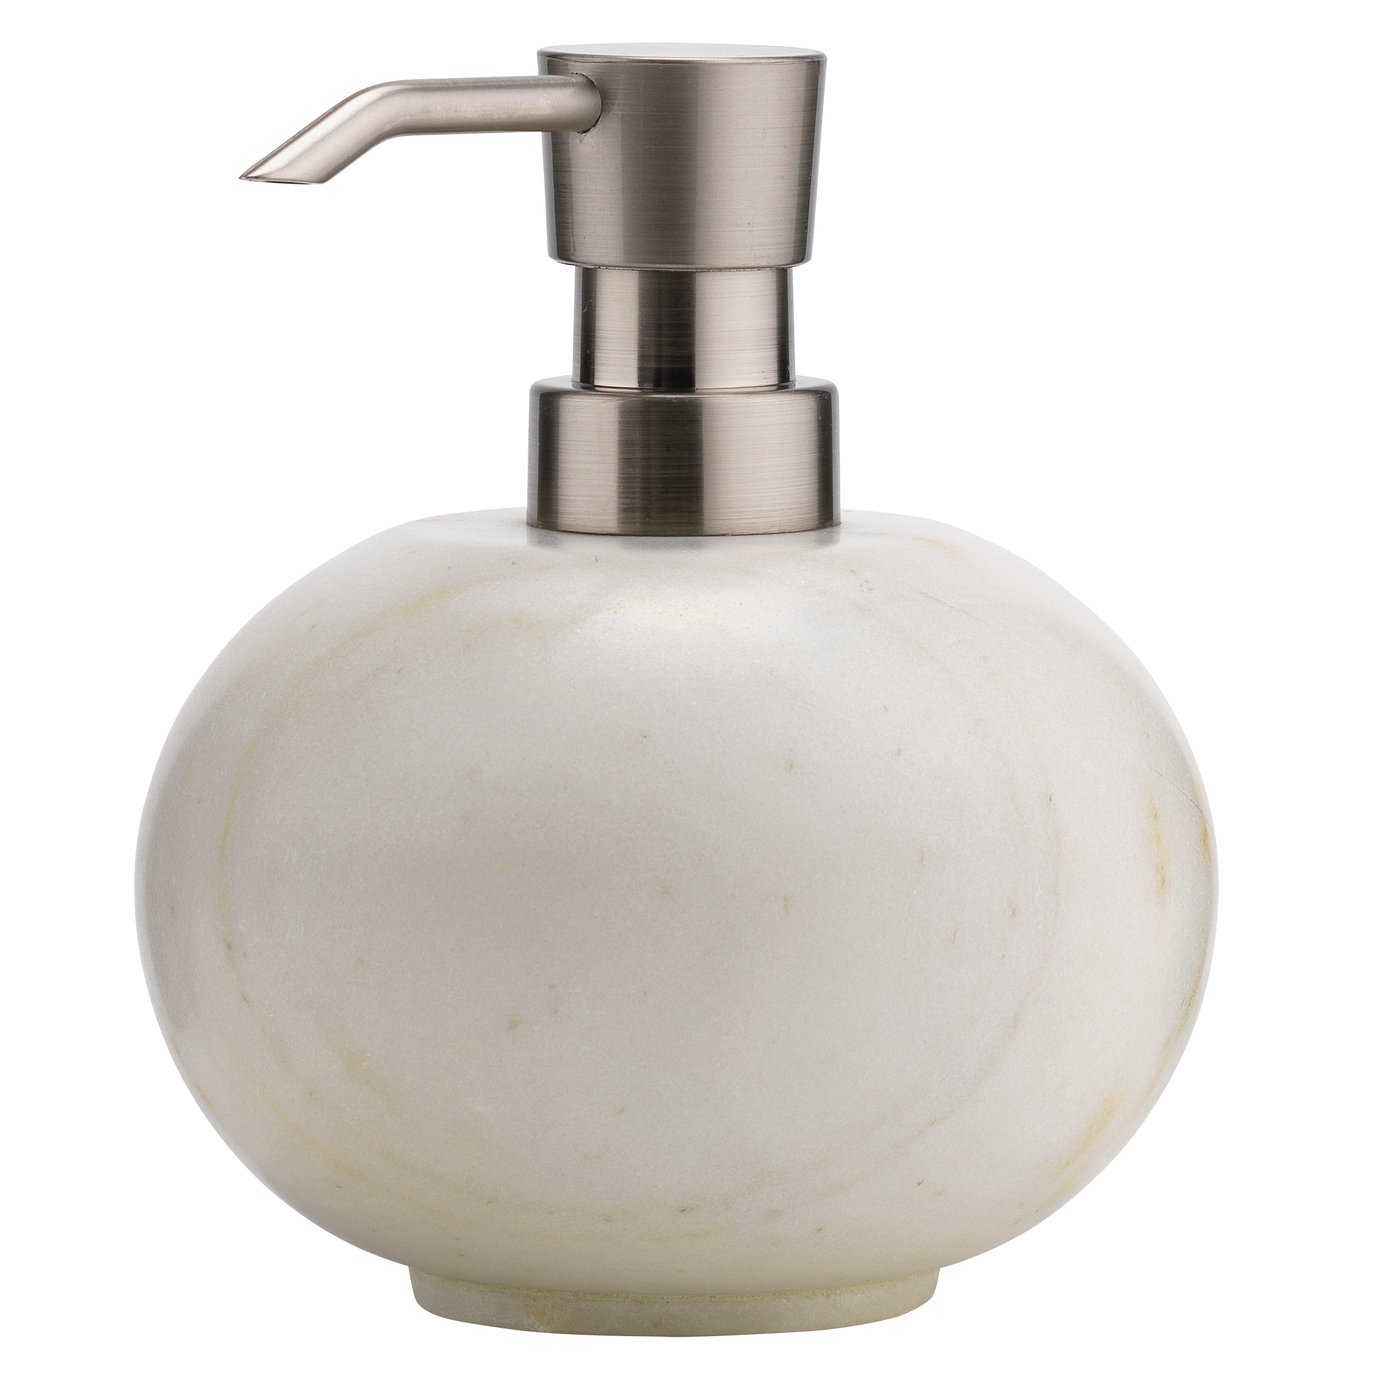 Sainsbury's Home Marble Soap Dispenser review